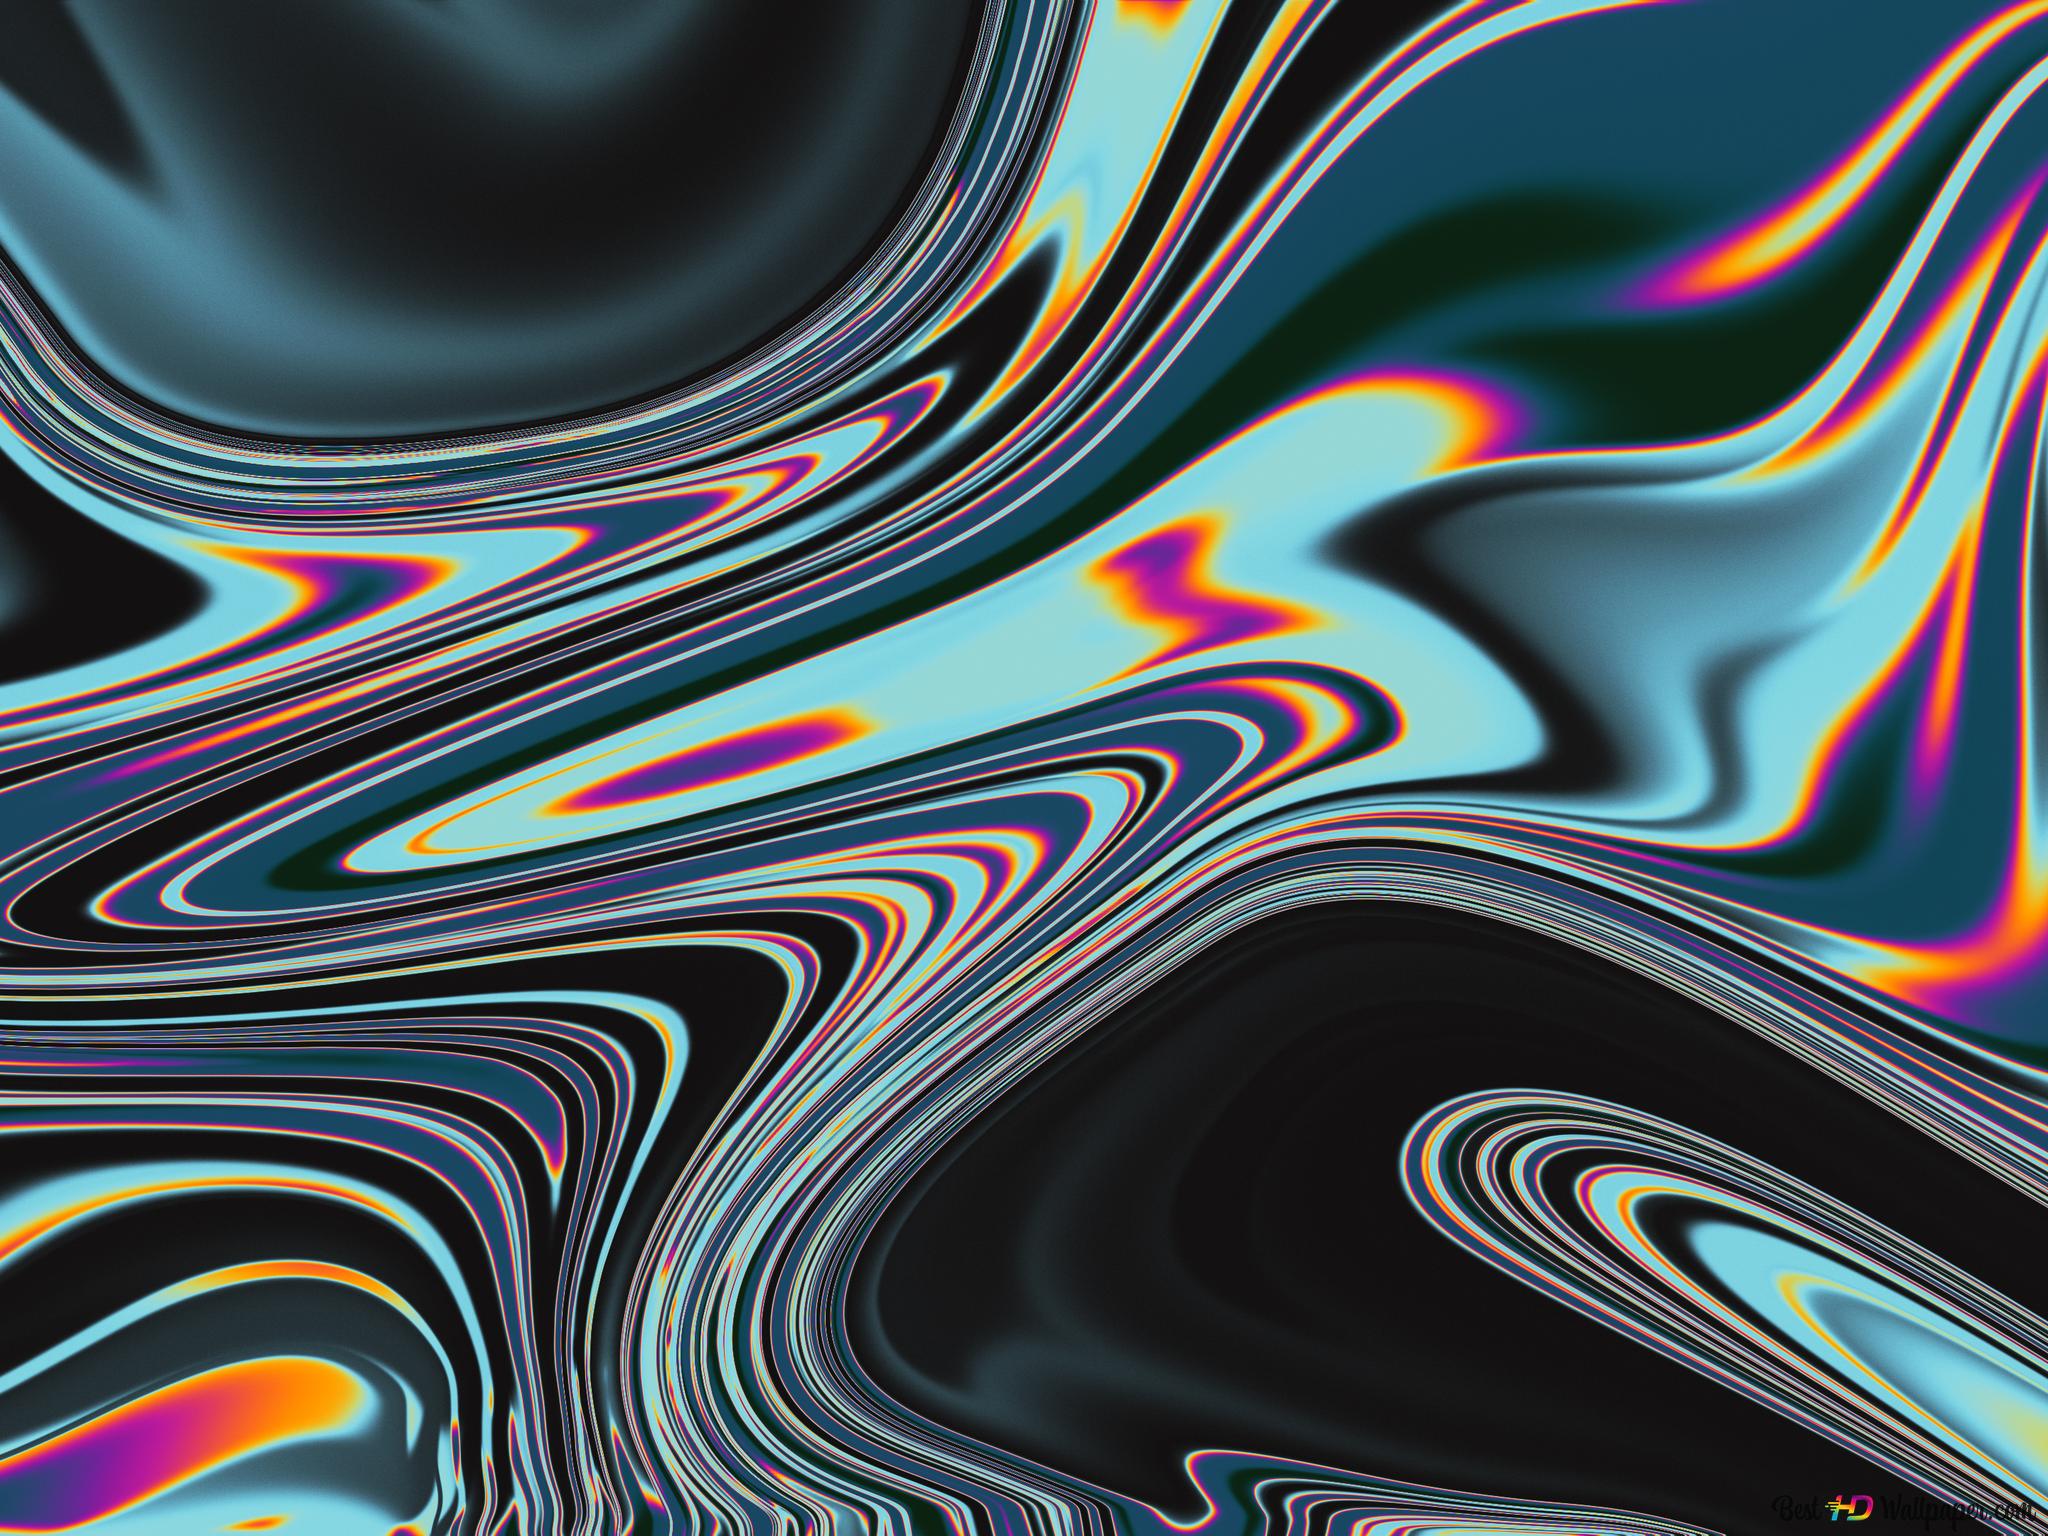 A computer generated image of colorful swirls - Abstract